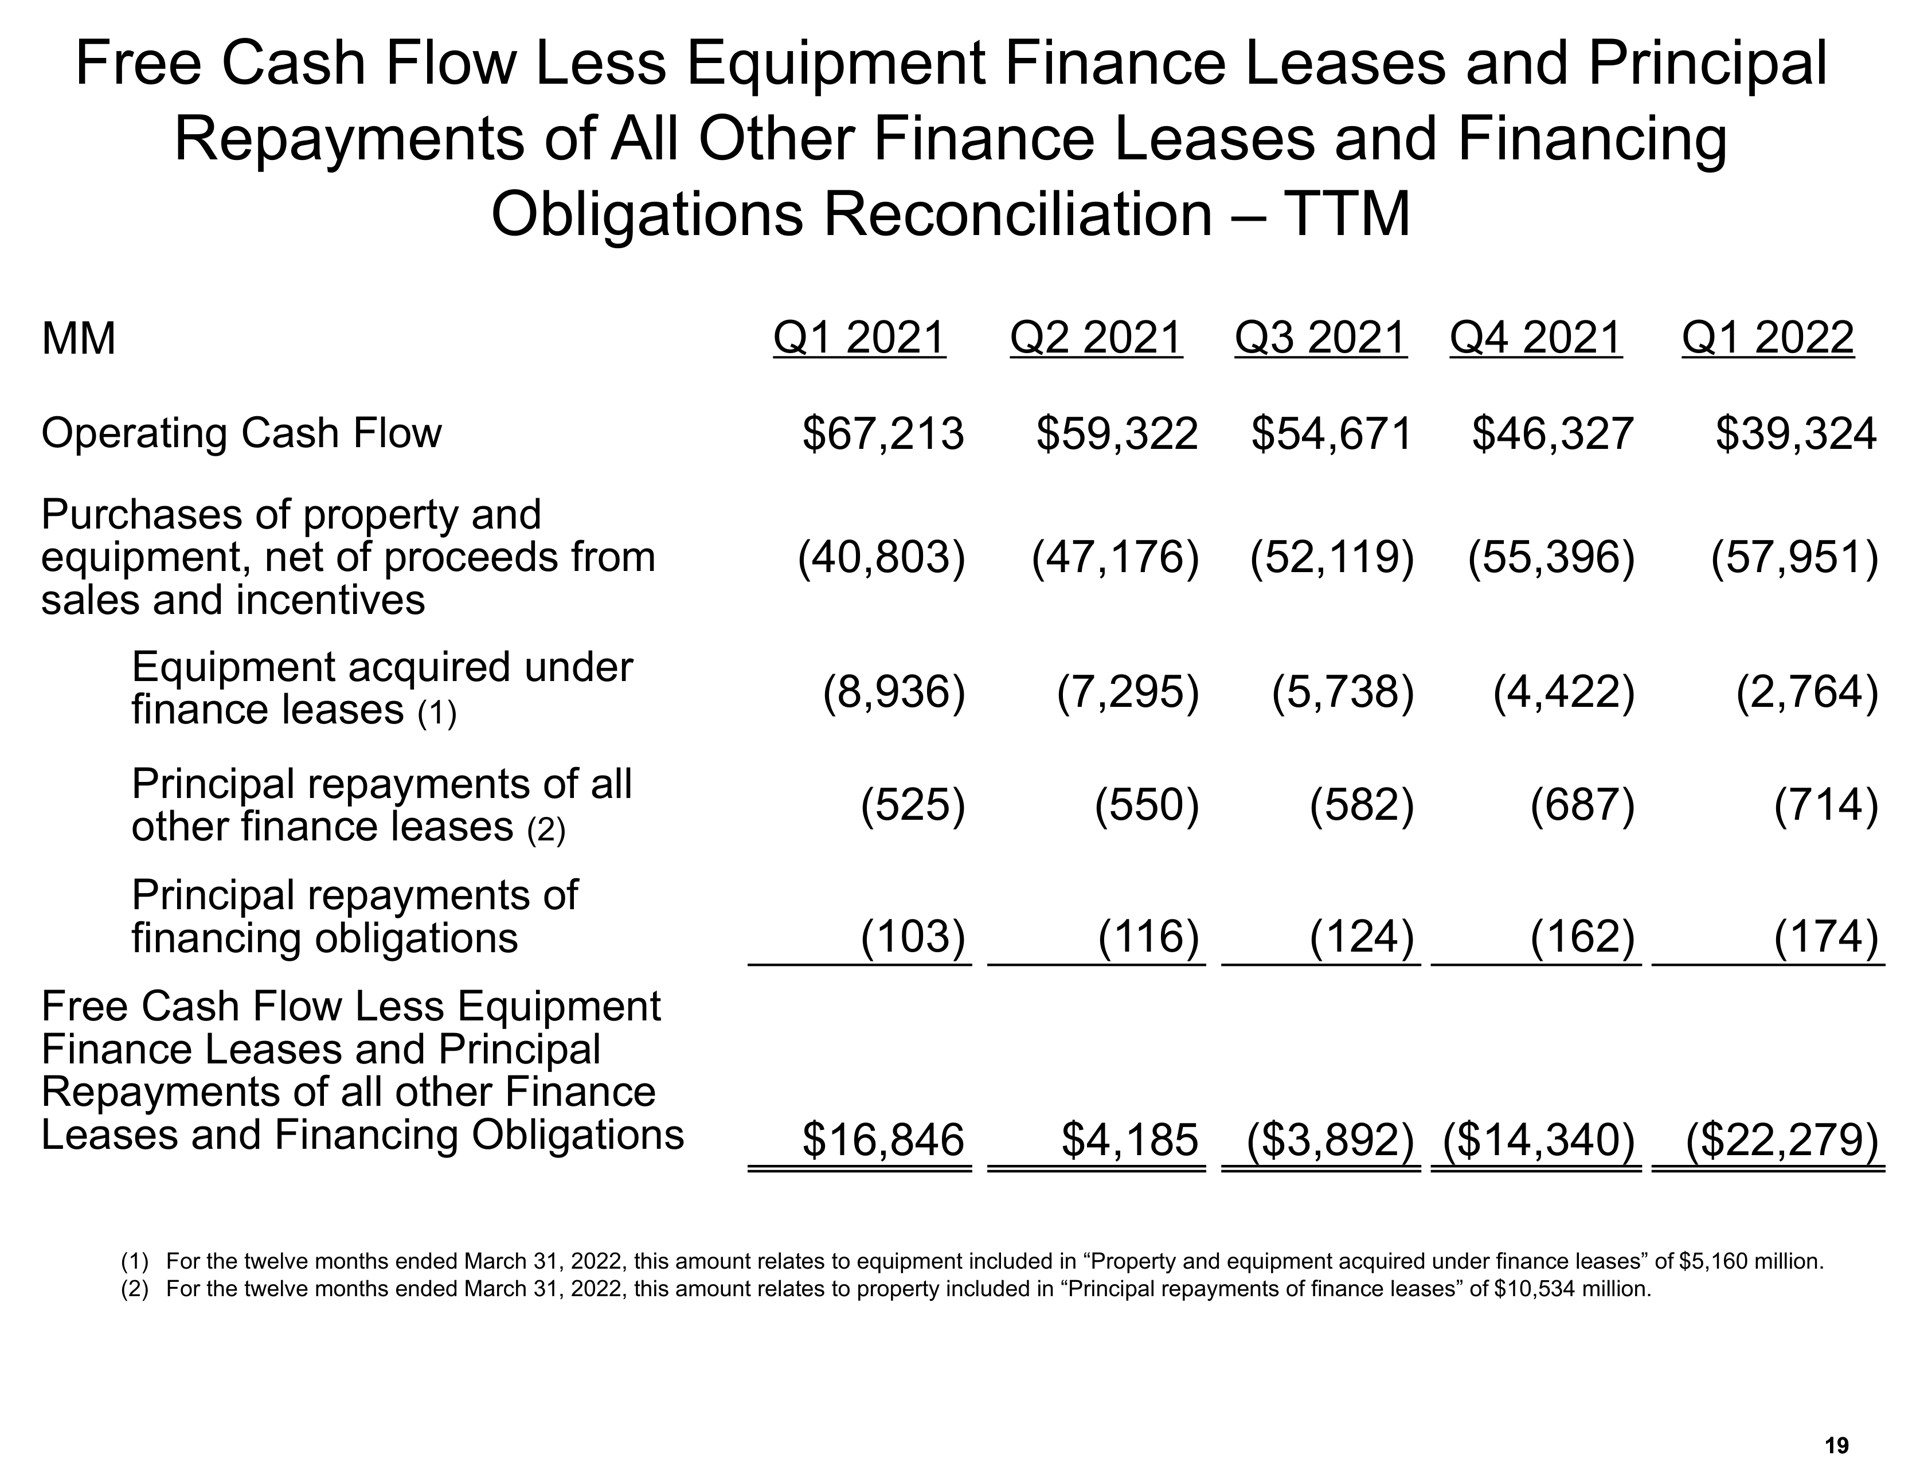 free cash flow less equipment finance leases and principal repayments of all other finance leases and financing obligations reconciliation eases | Amazon